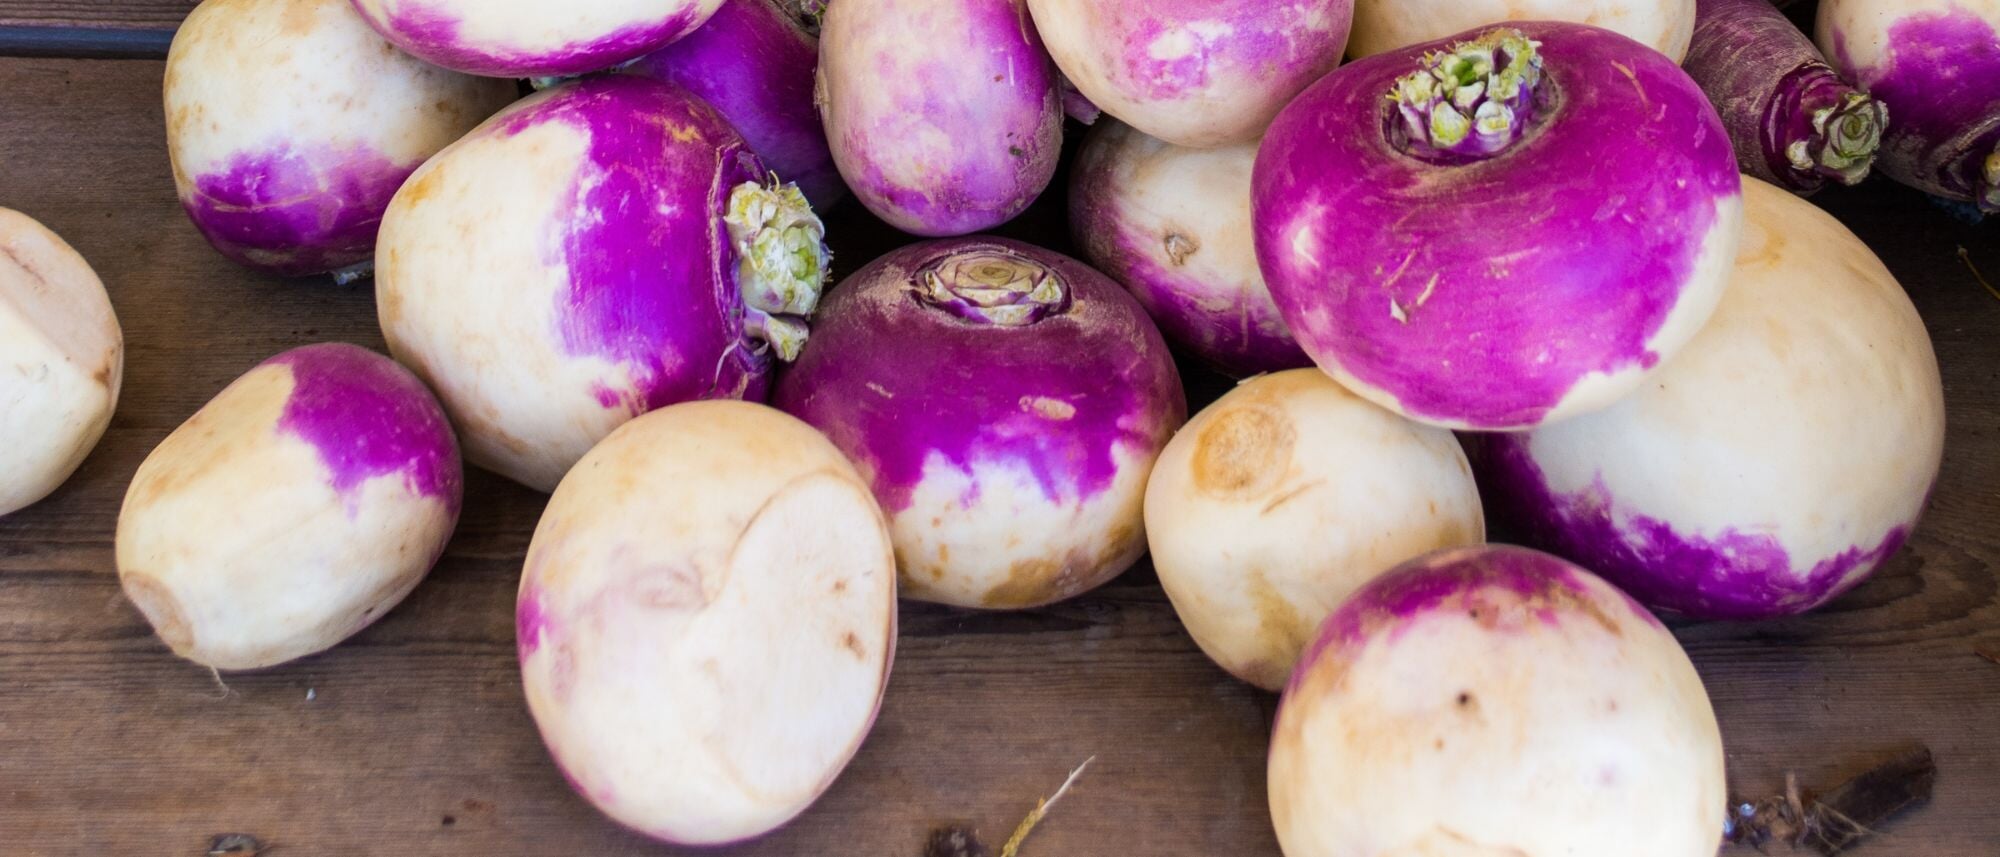 purple and white turnips from the garden